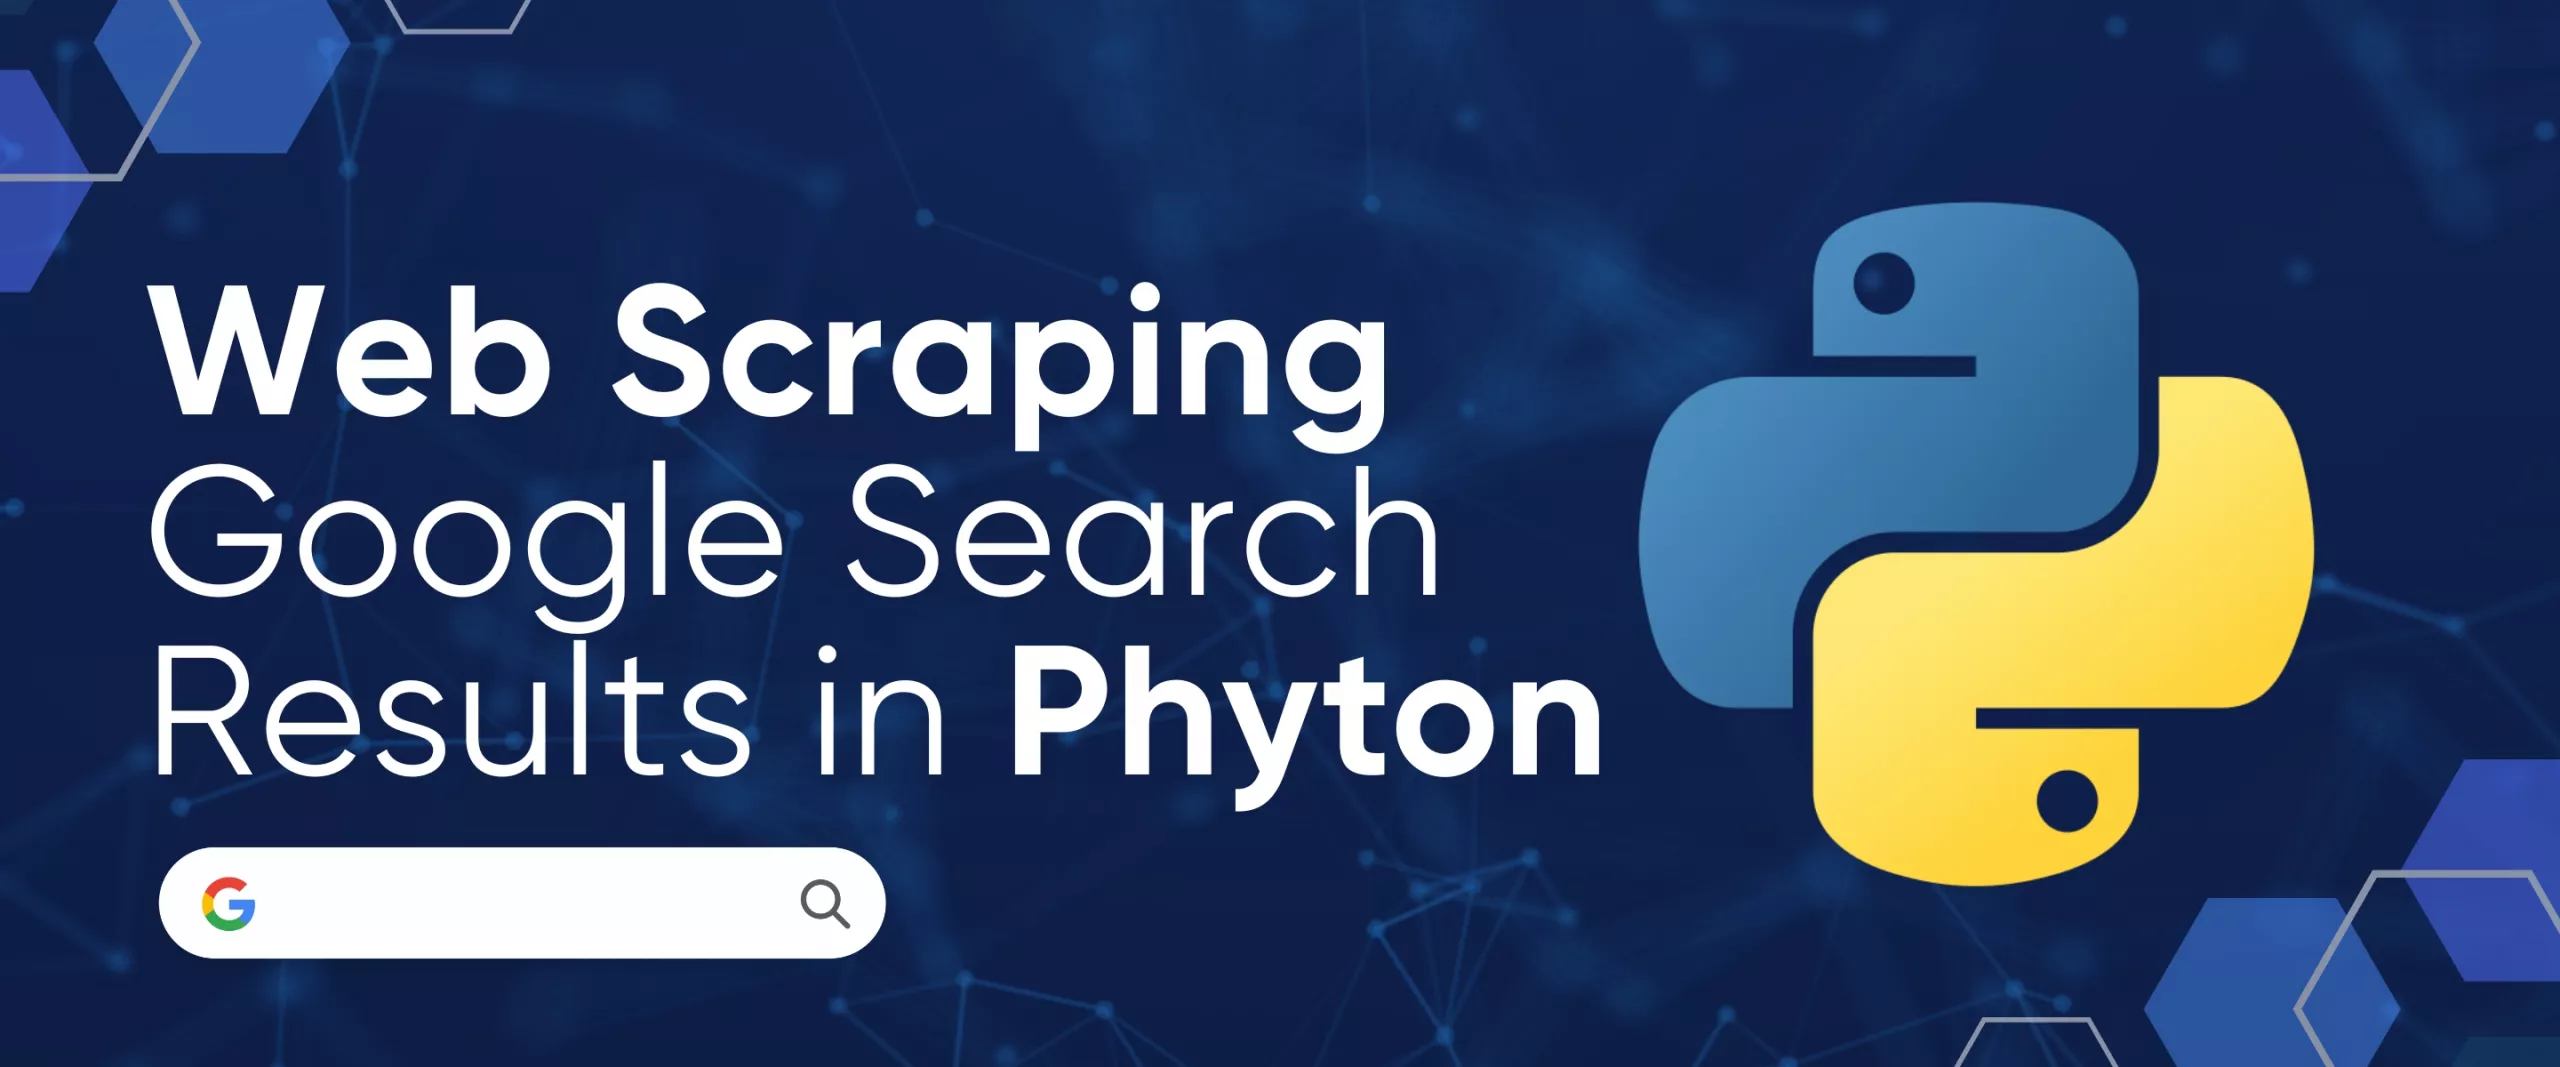 Web Scraping Google Search Results in Python